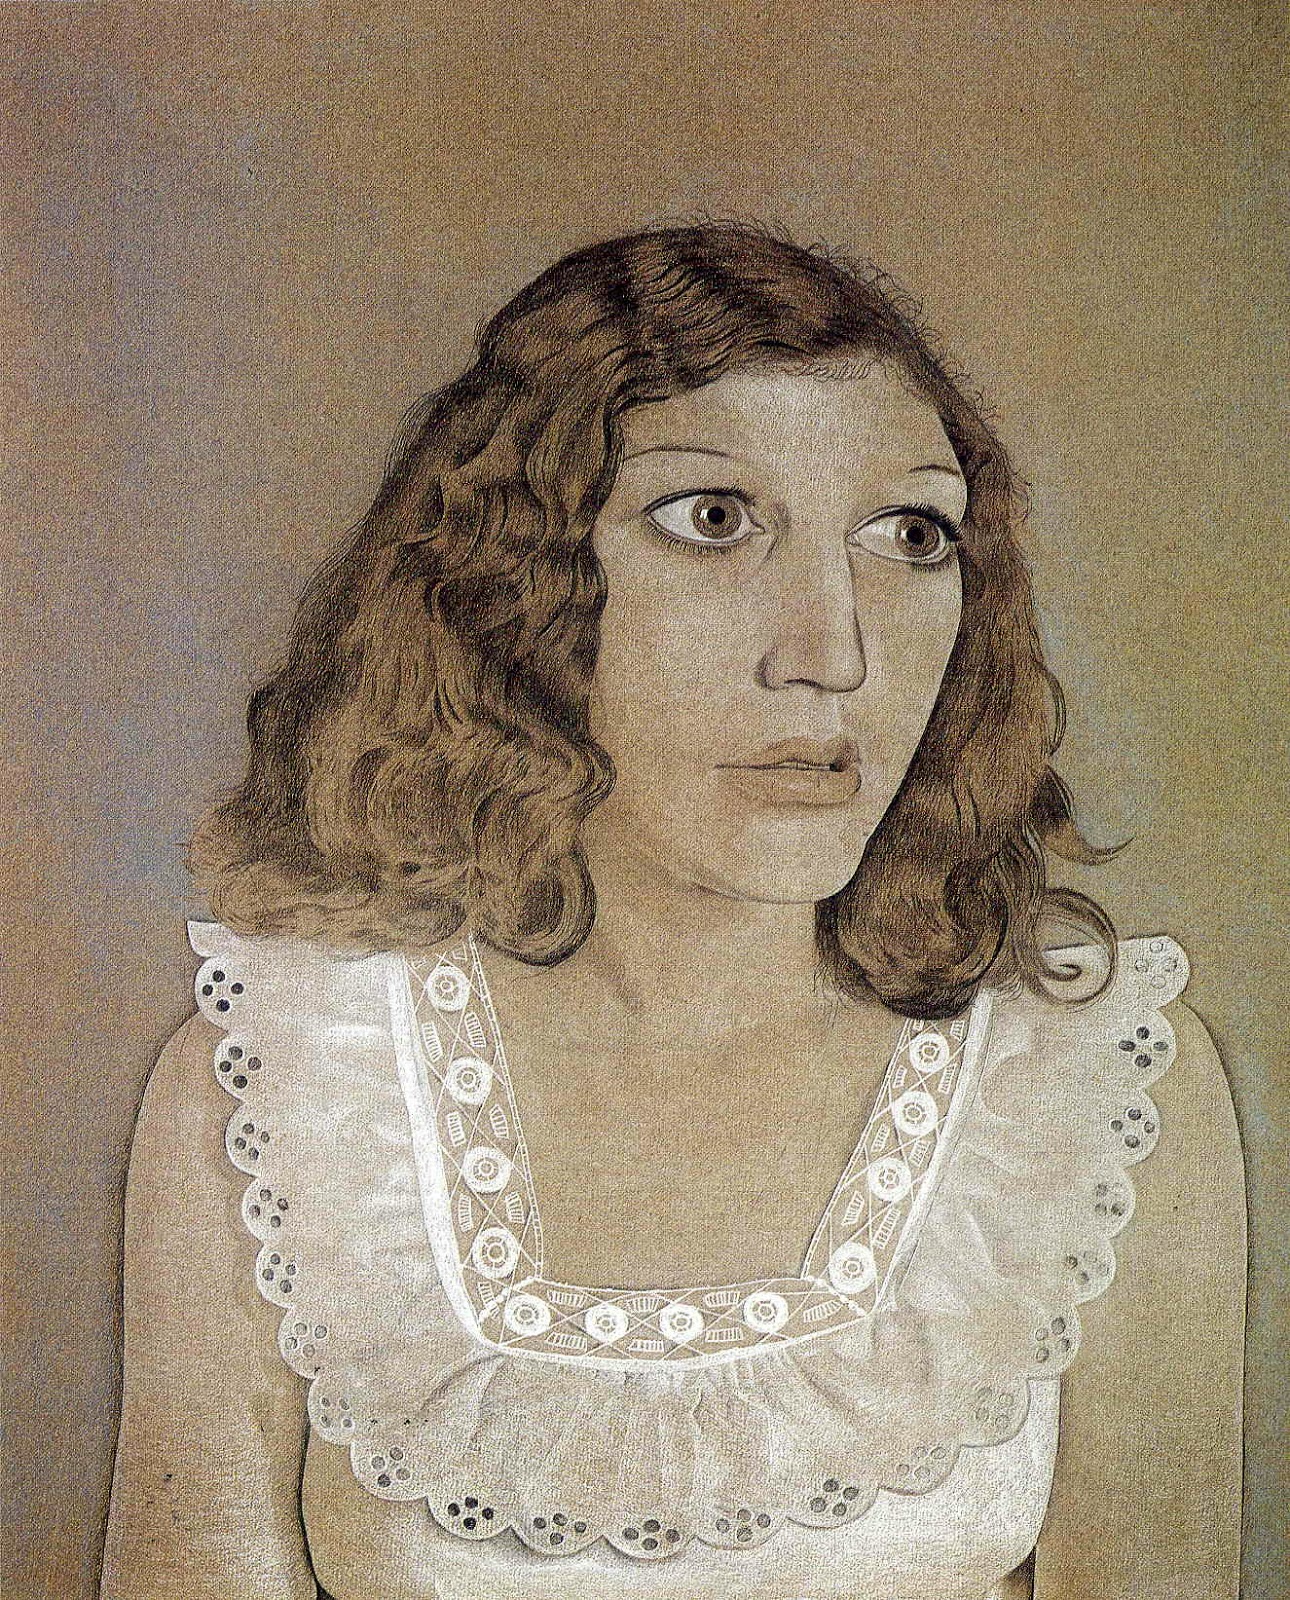 The Woman Gallery: Lucian Michael Freud (1922 – 2011)